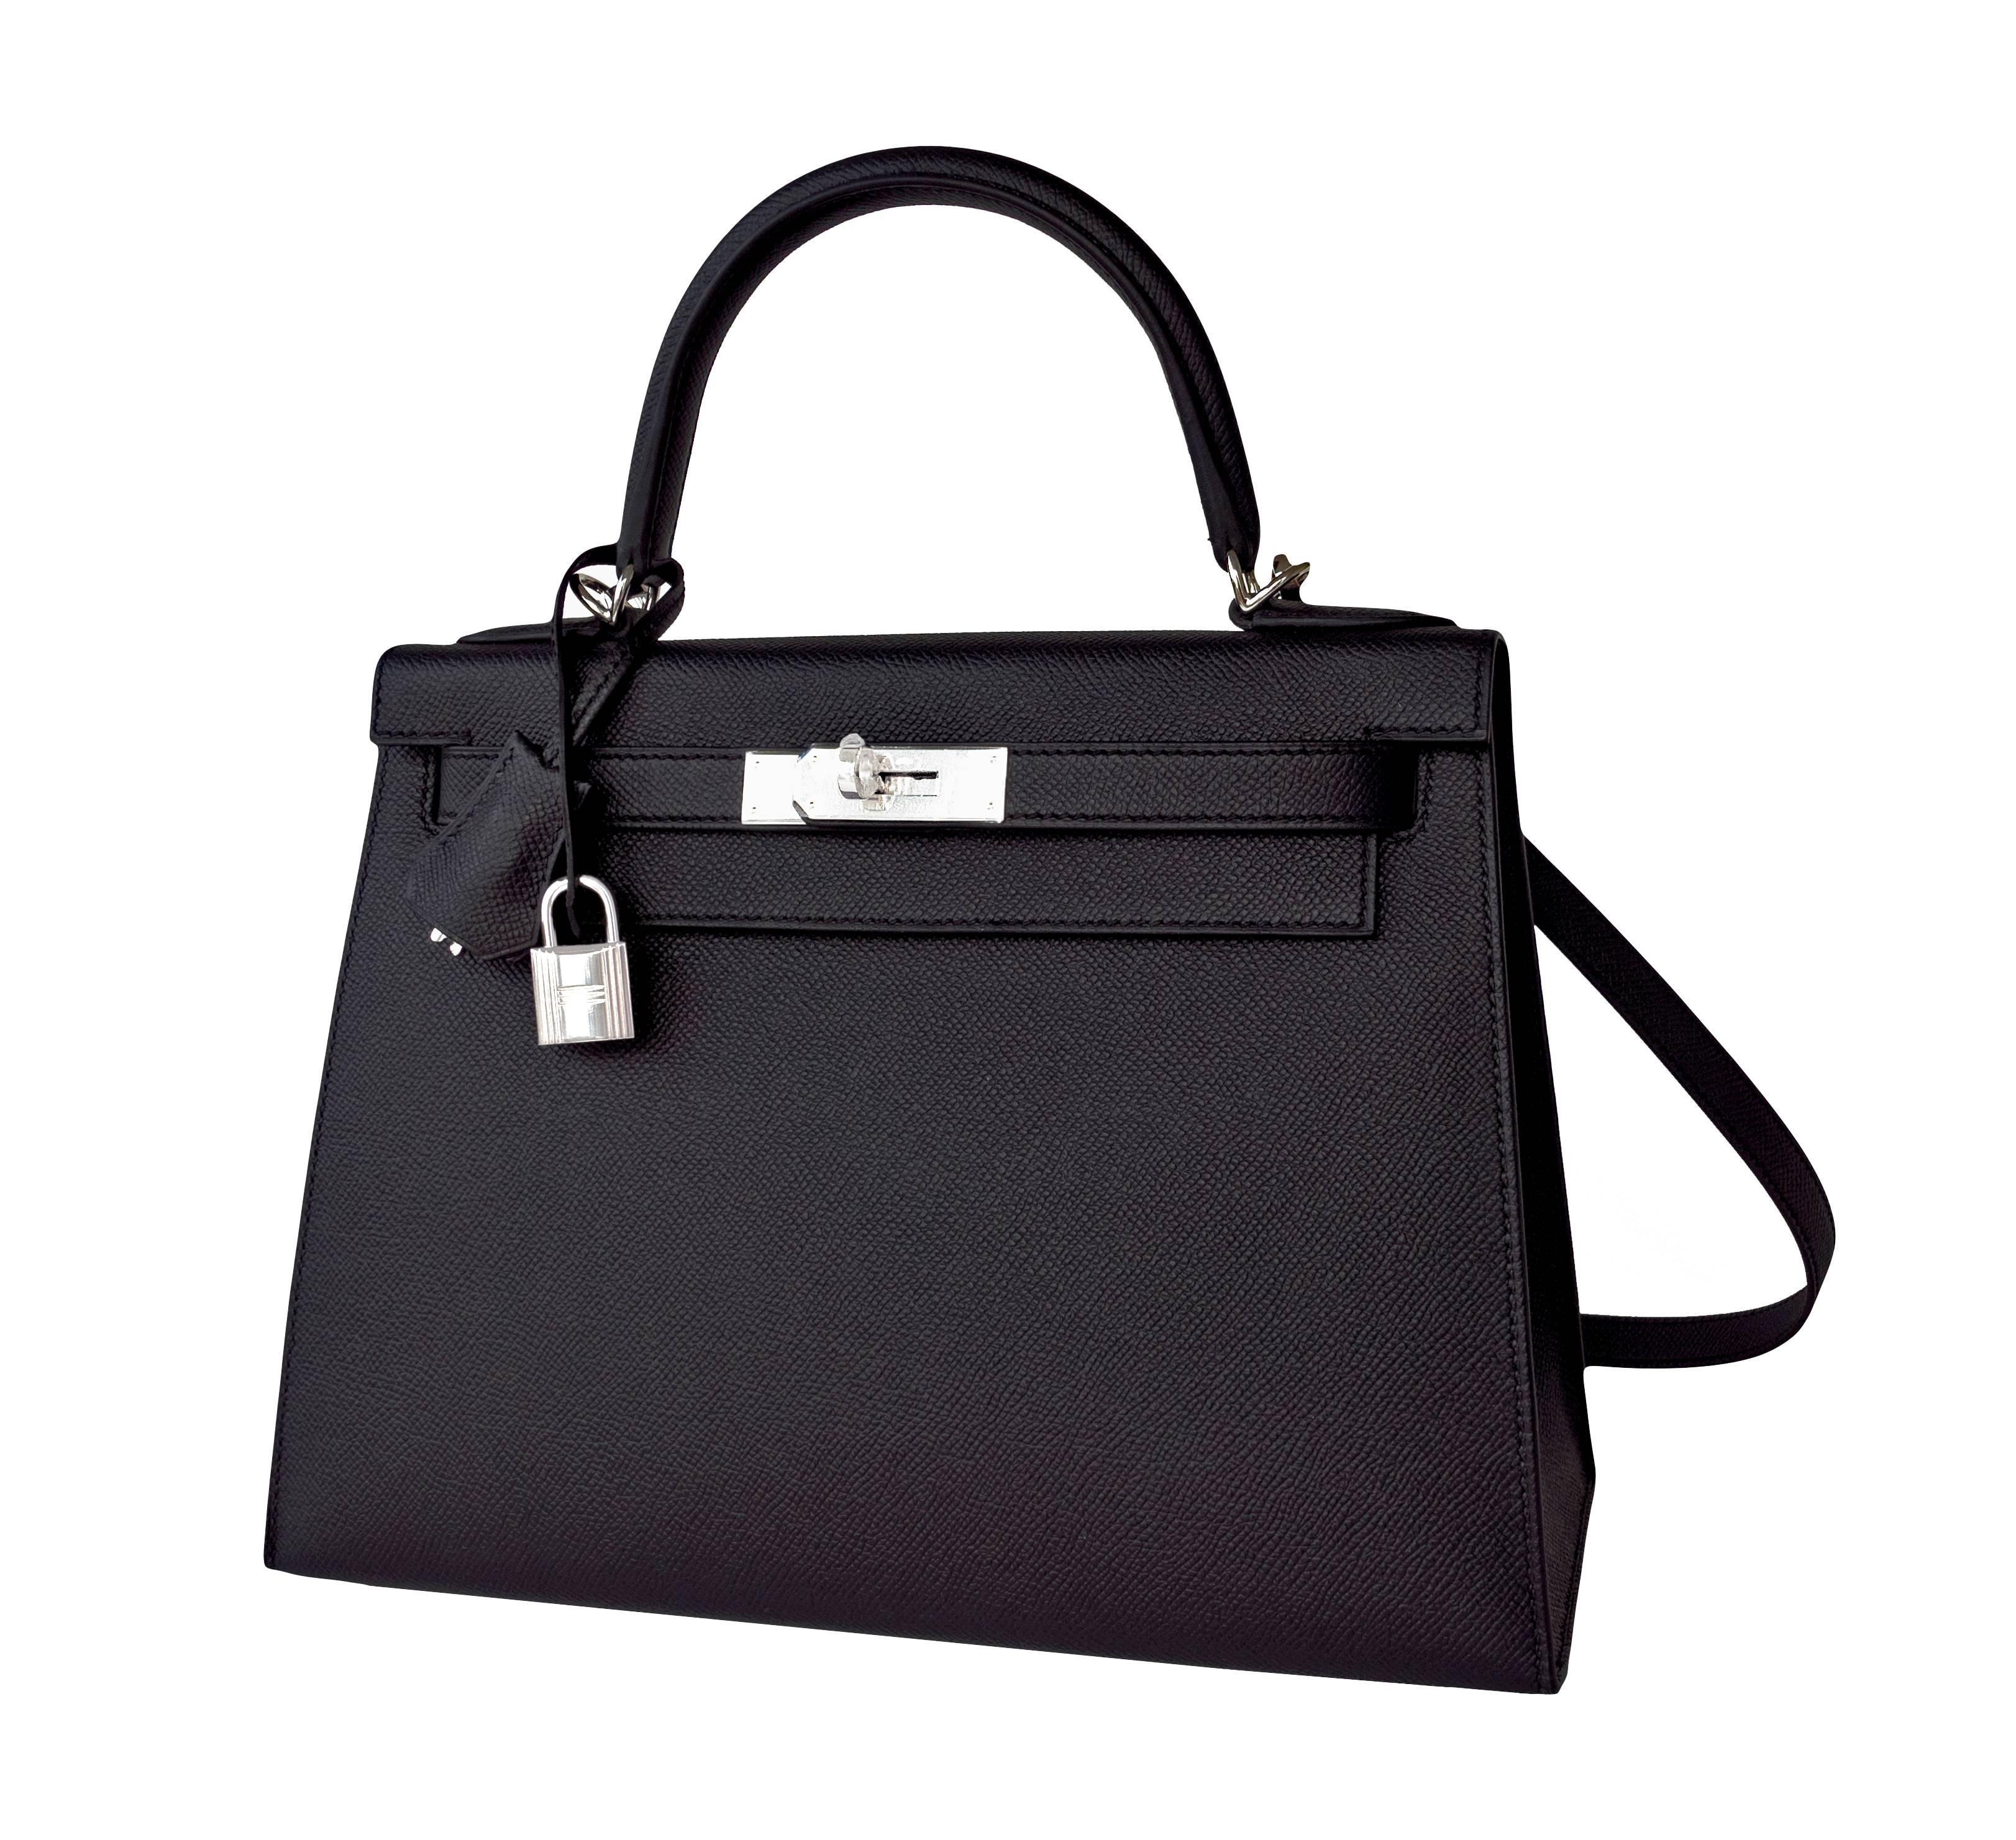 Fashionista Hermes Jet Black 28cm Epsom Sellier Kelly Palladium X Stamp
Brand New in Box. Store Fresh. Pristine Condition (with plastic on hardware).
Just purchased from Hermes store; bag bears new interior 2016 X stamp.
Perfect gift! Comes full